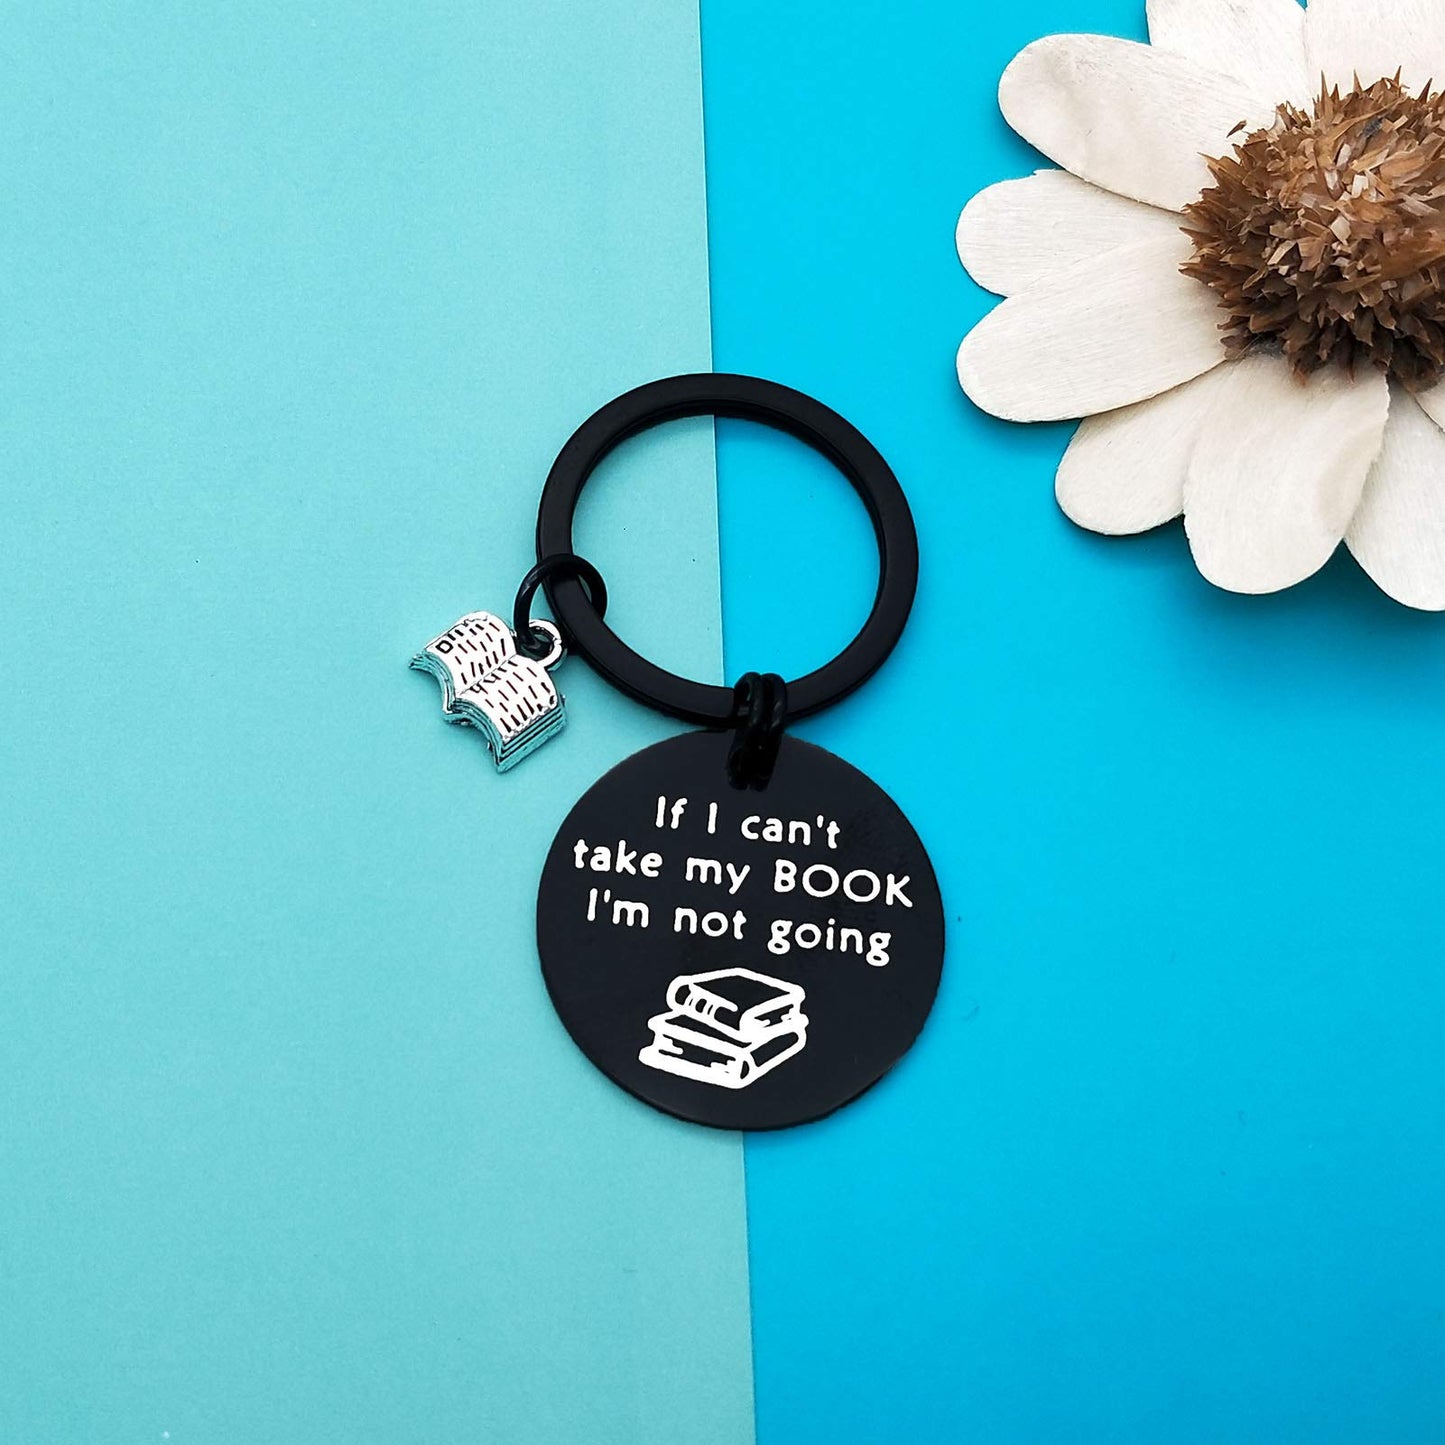 Book Lover Gift Reading Book Club Keychain Reading Lover Gift Librarian Gift If I Can't Take My Book I'm Not Going Keyring Reader Writers Bookworm Birthday Christmas Gift Bibliophile Gift for Friend